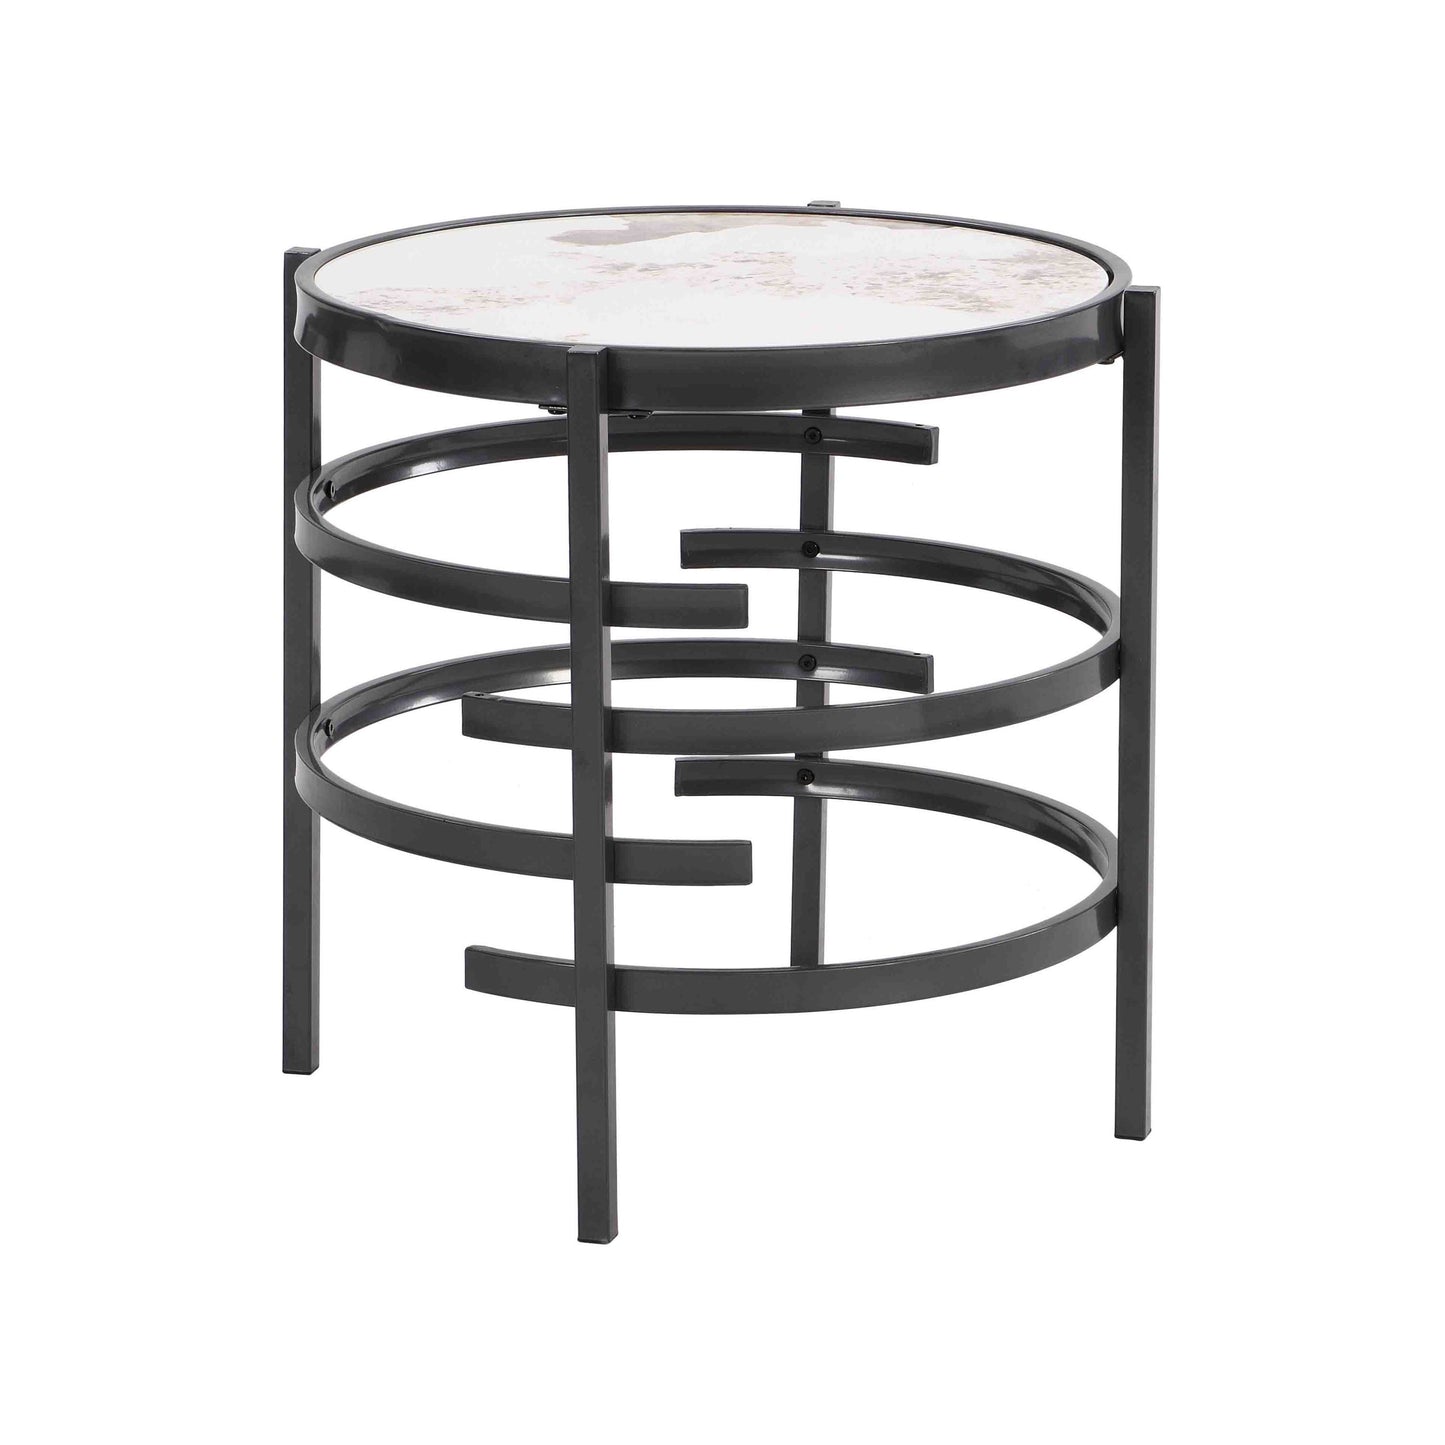 Elegant Pandora Sintered Stone End Table, Darker Gray Small Coffee Table for Living Room 20.67''W x 20.67''D x 21.65''H